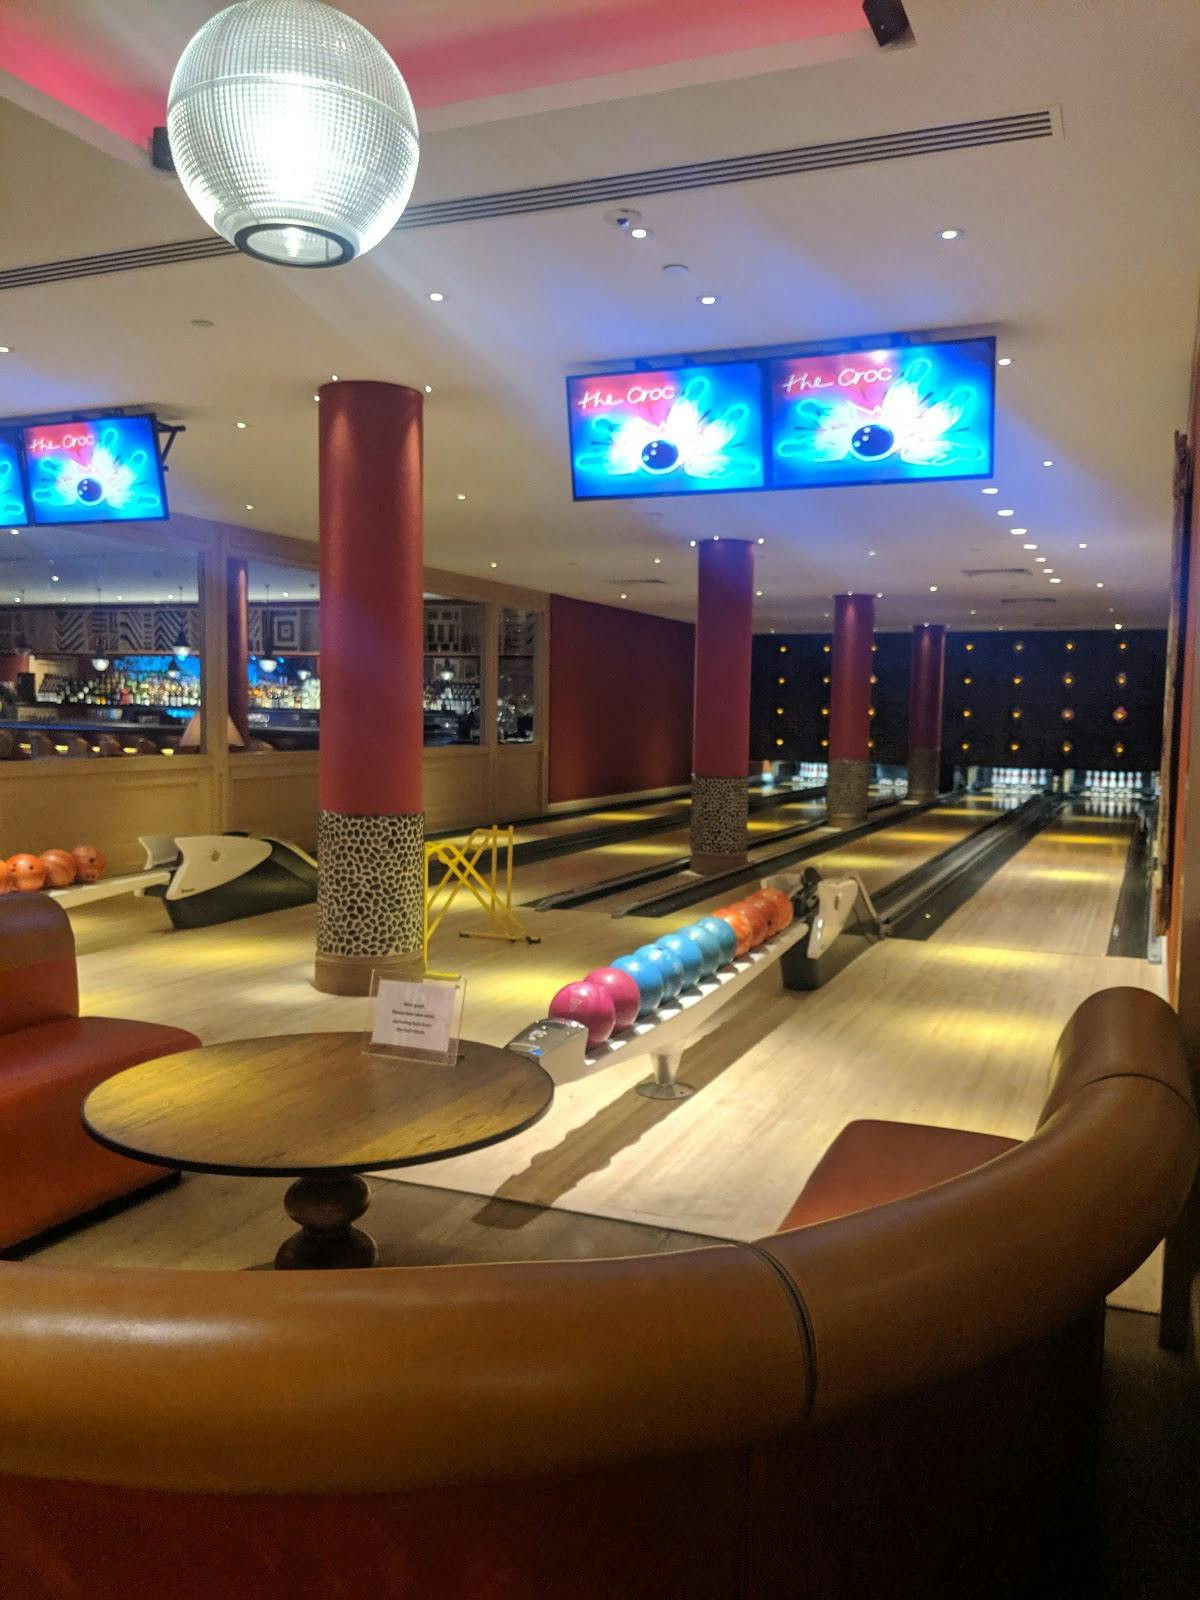 Image - The Croc Bowling Alley